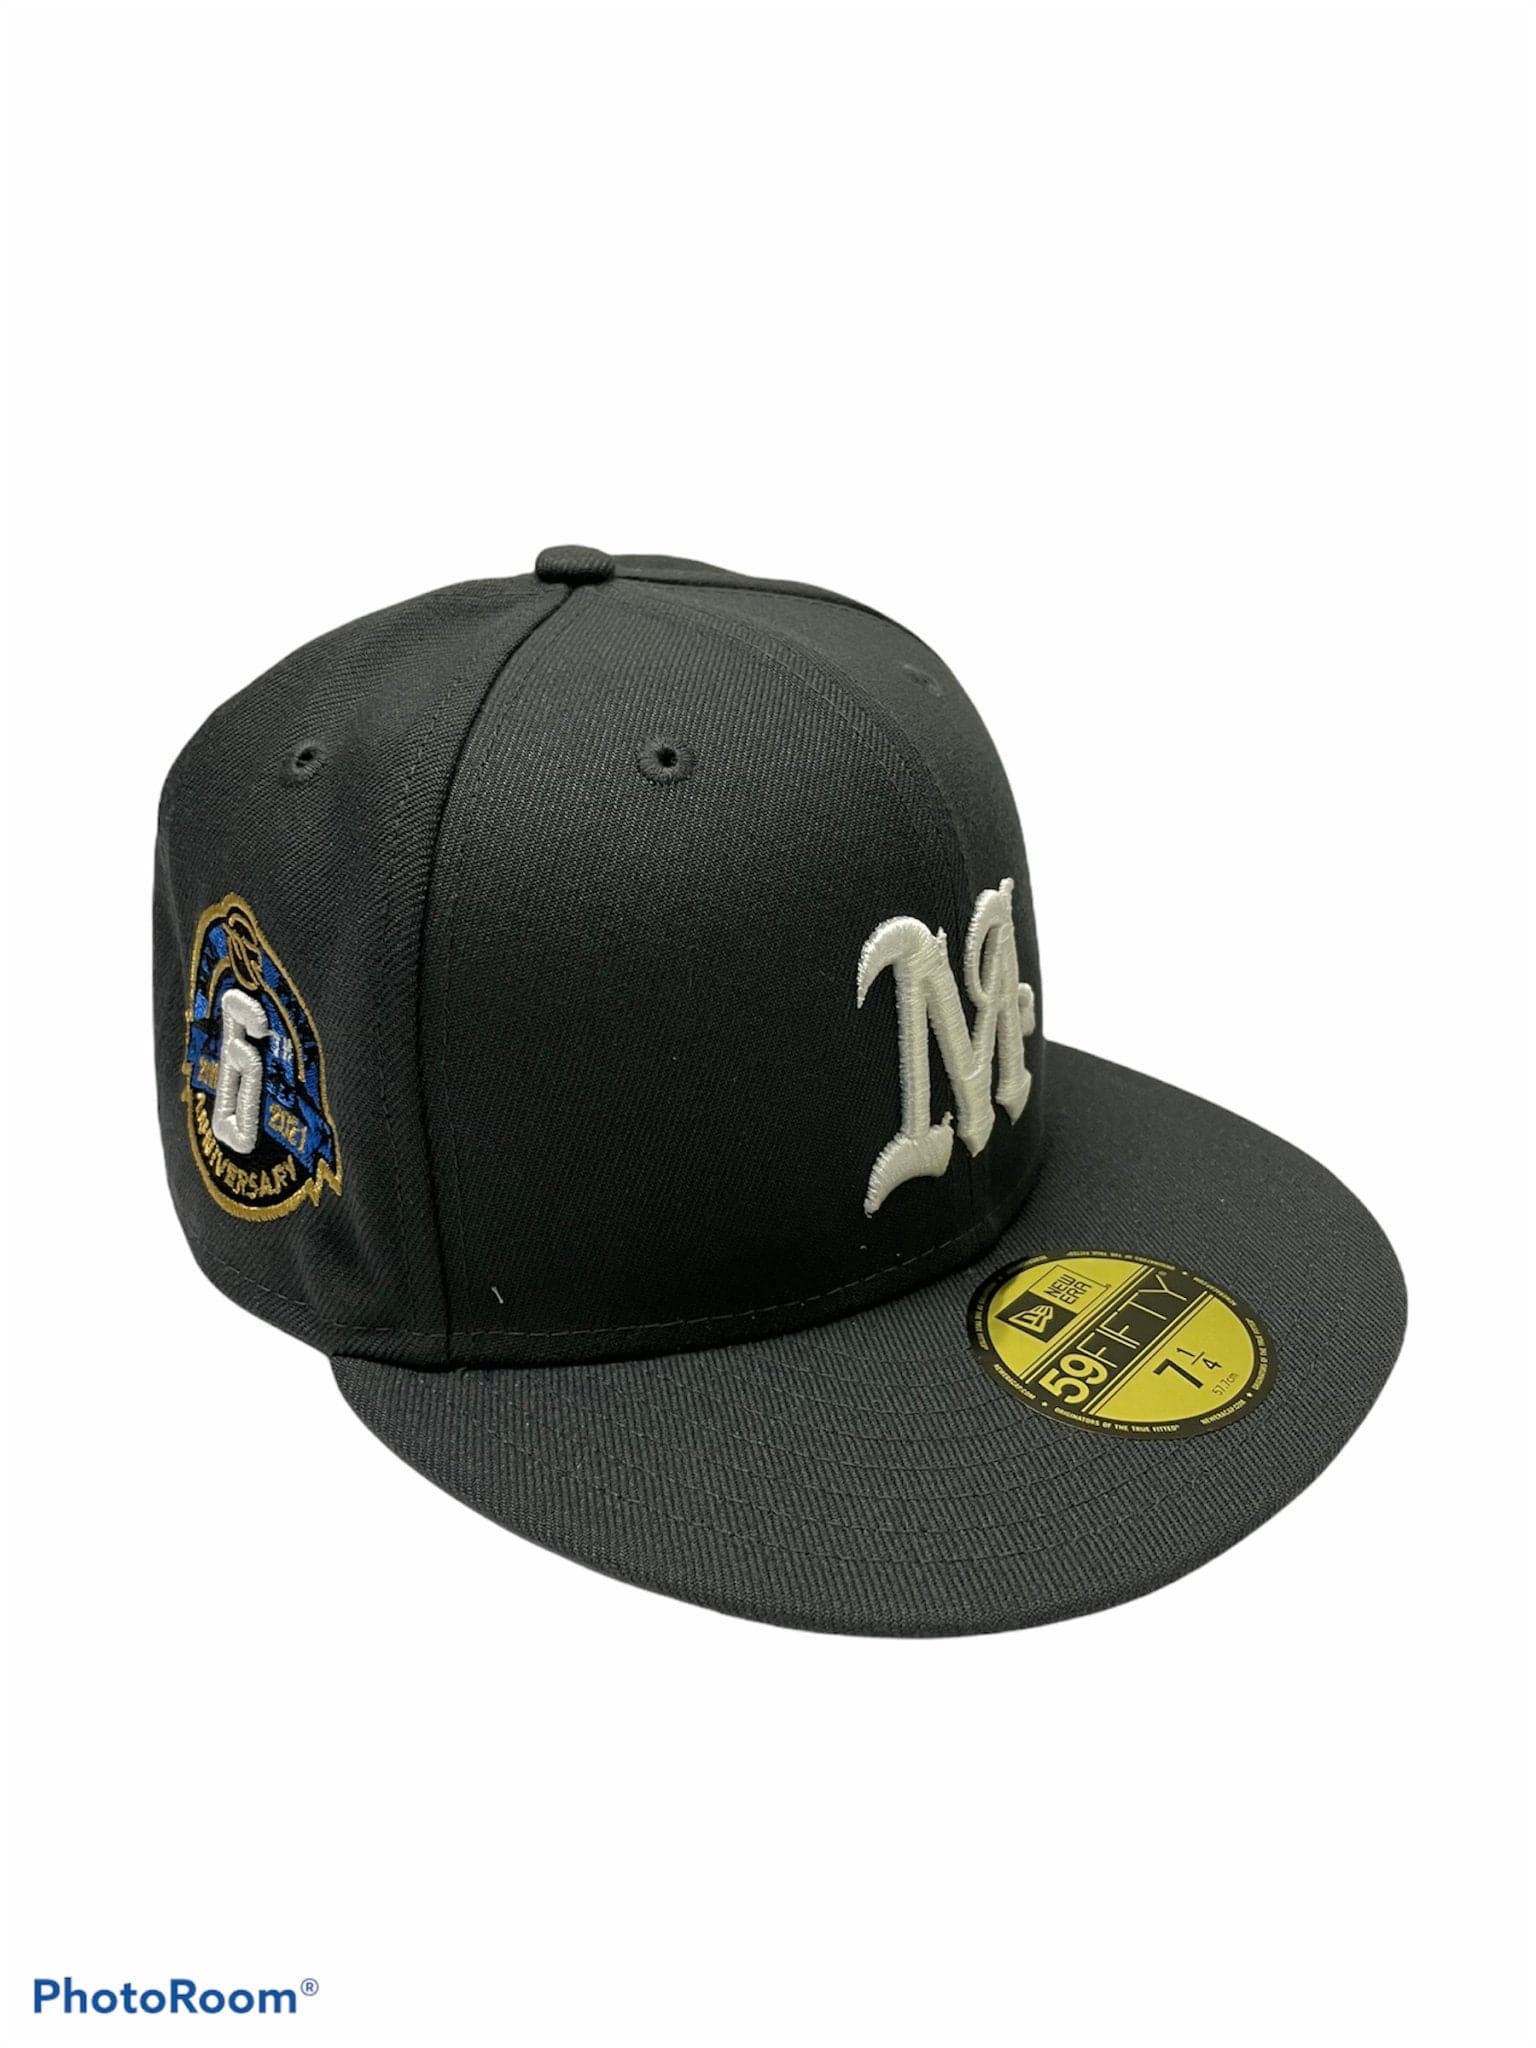 THE MAGNOLIA PARK X NEW ERA 5950 - 6 YEAR ANNIVERSARY FITTED (GREY) - The Magnolia Park